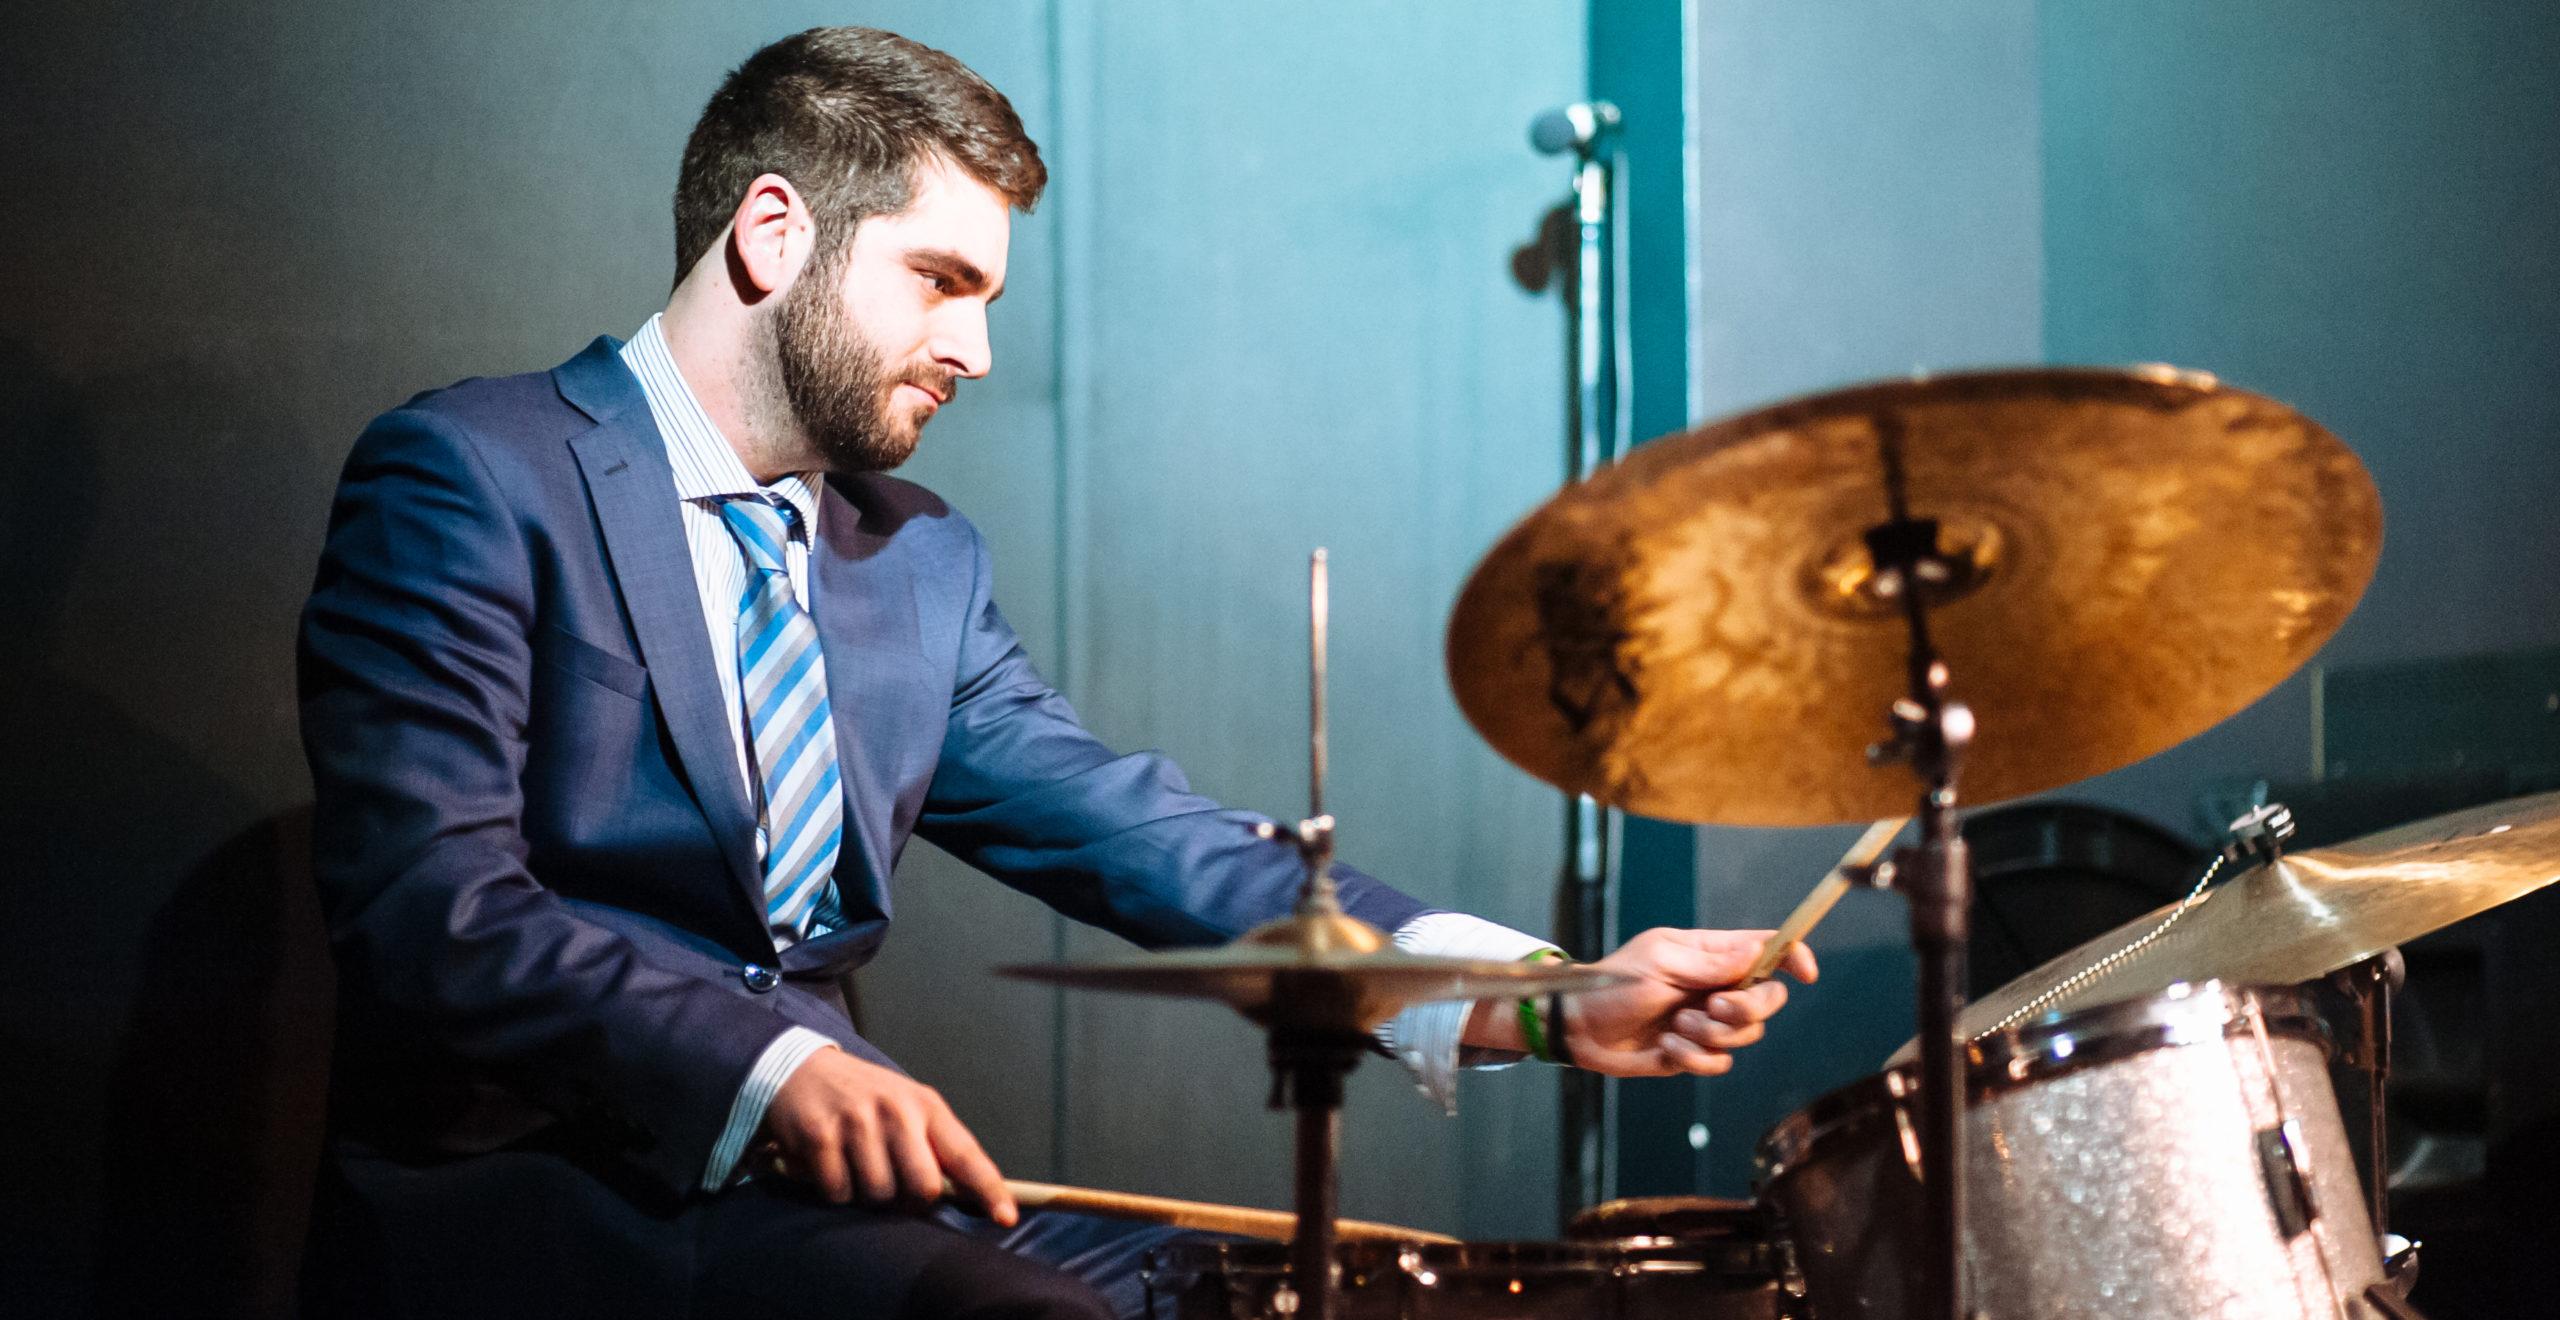 A drummer in a suit performing in a green room